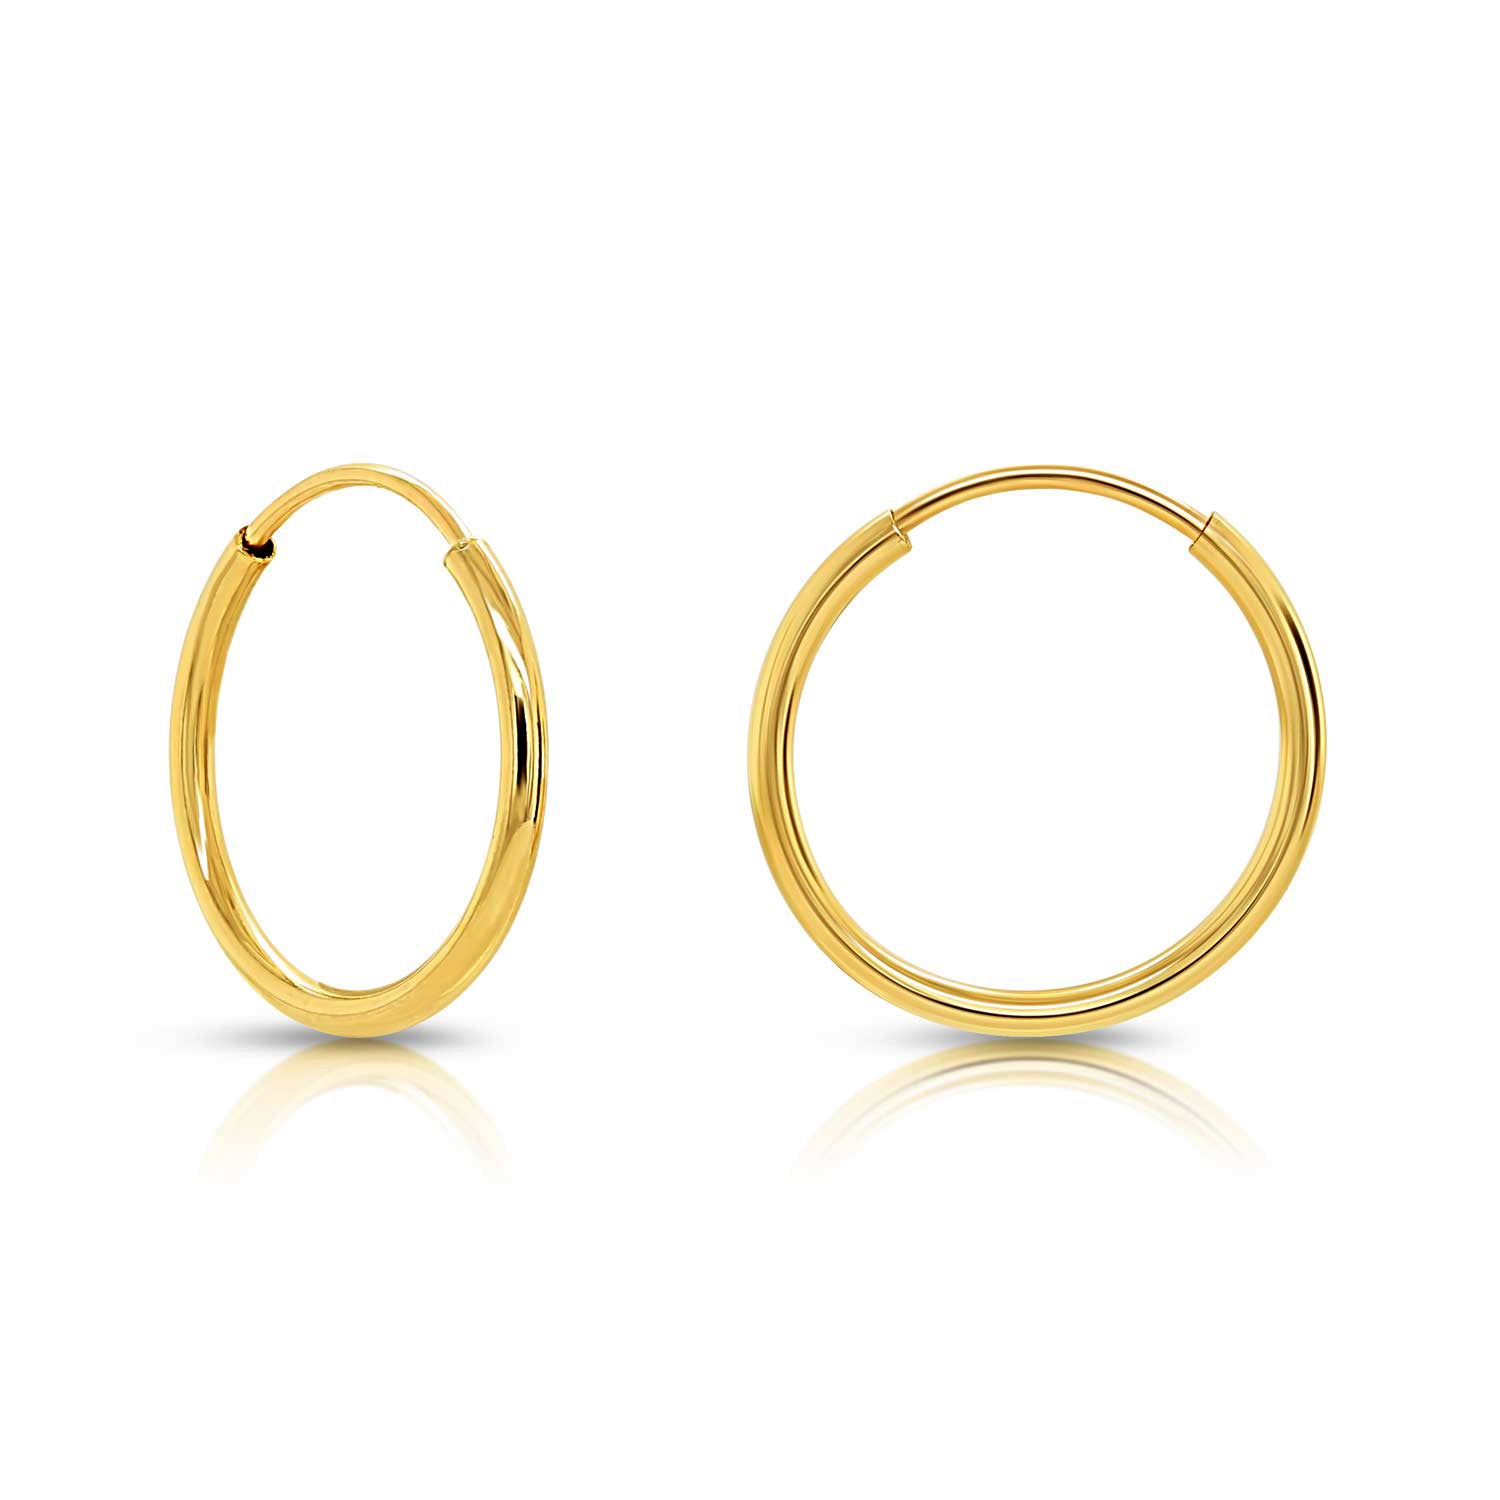 10k Yellow Gold Shiny Endless Round Hoop Earrings fine designer jewelry for men and women